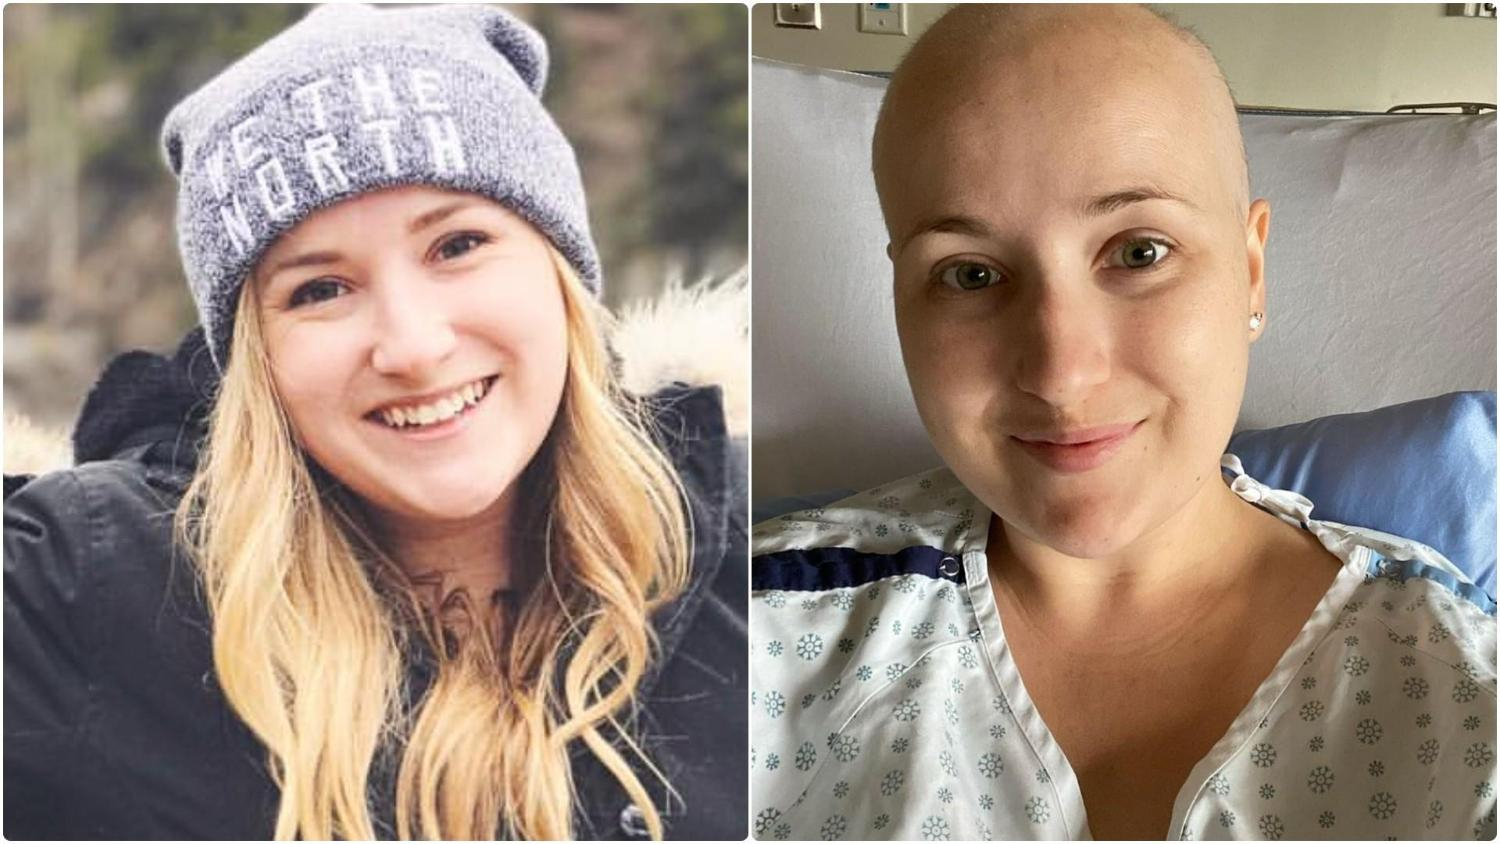 Who Was Kimberley Nix? Tik-Toker Who Lost the Battle with Metastatic Sarcoma, Announced her own Death in an Emotional Video ” I Have Passed Away”